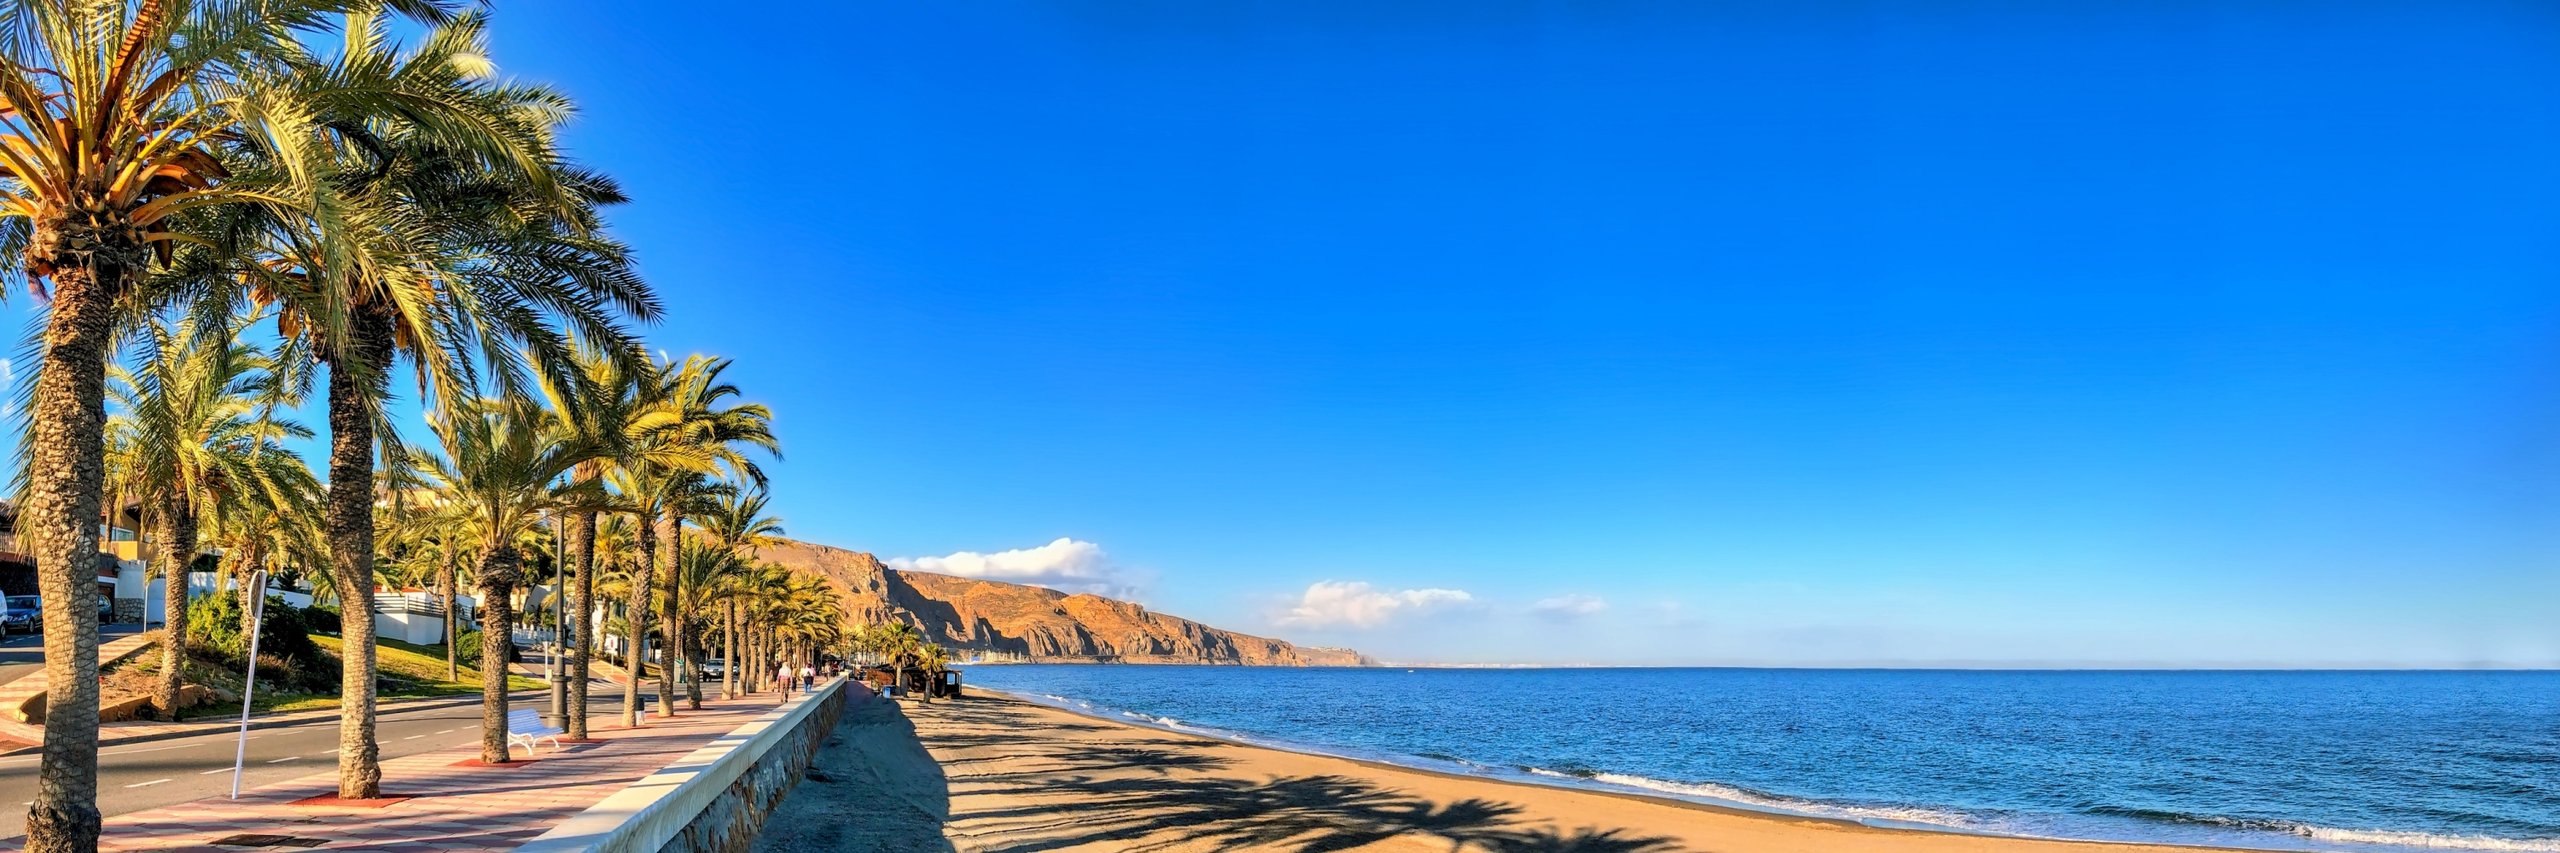 Panoramic view of the Mediterranean beach of Roquetas de Mar in southern Spain.